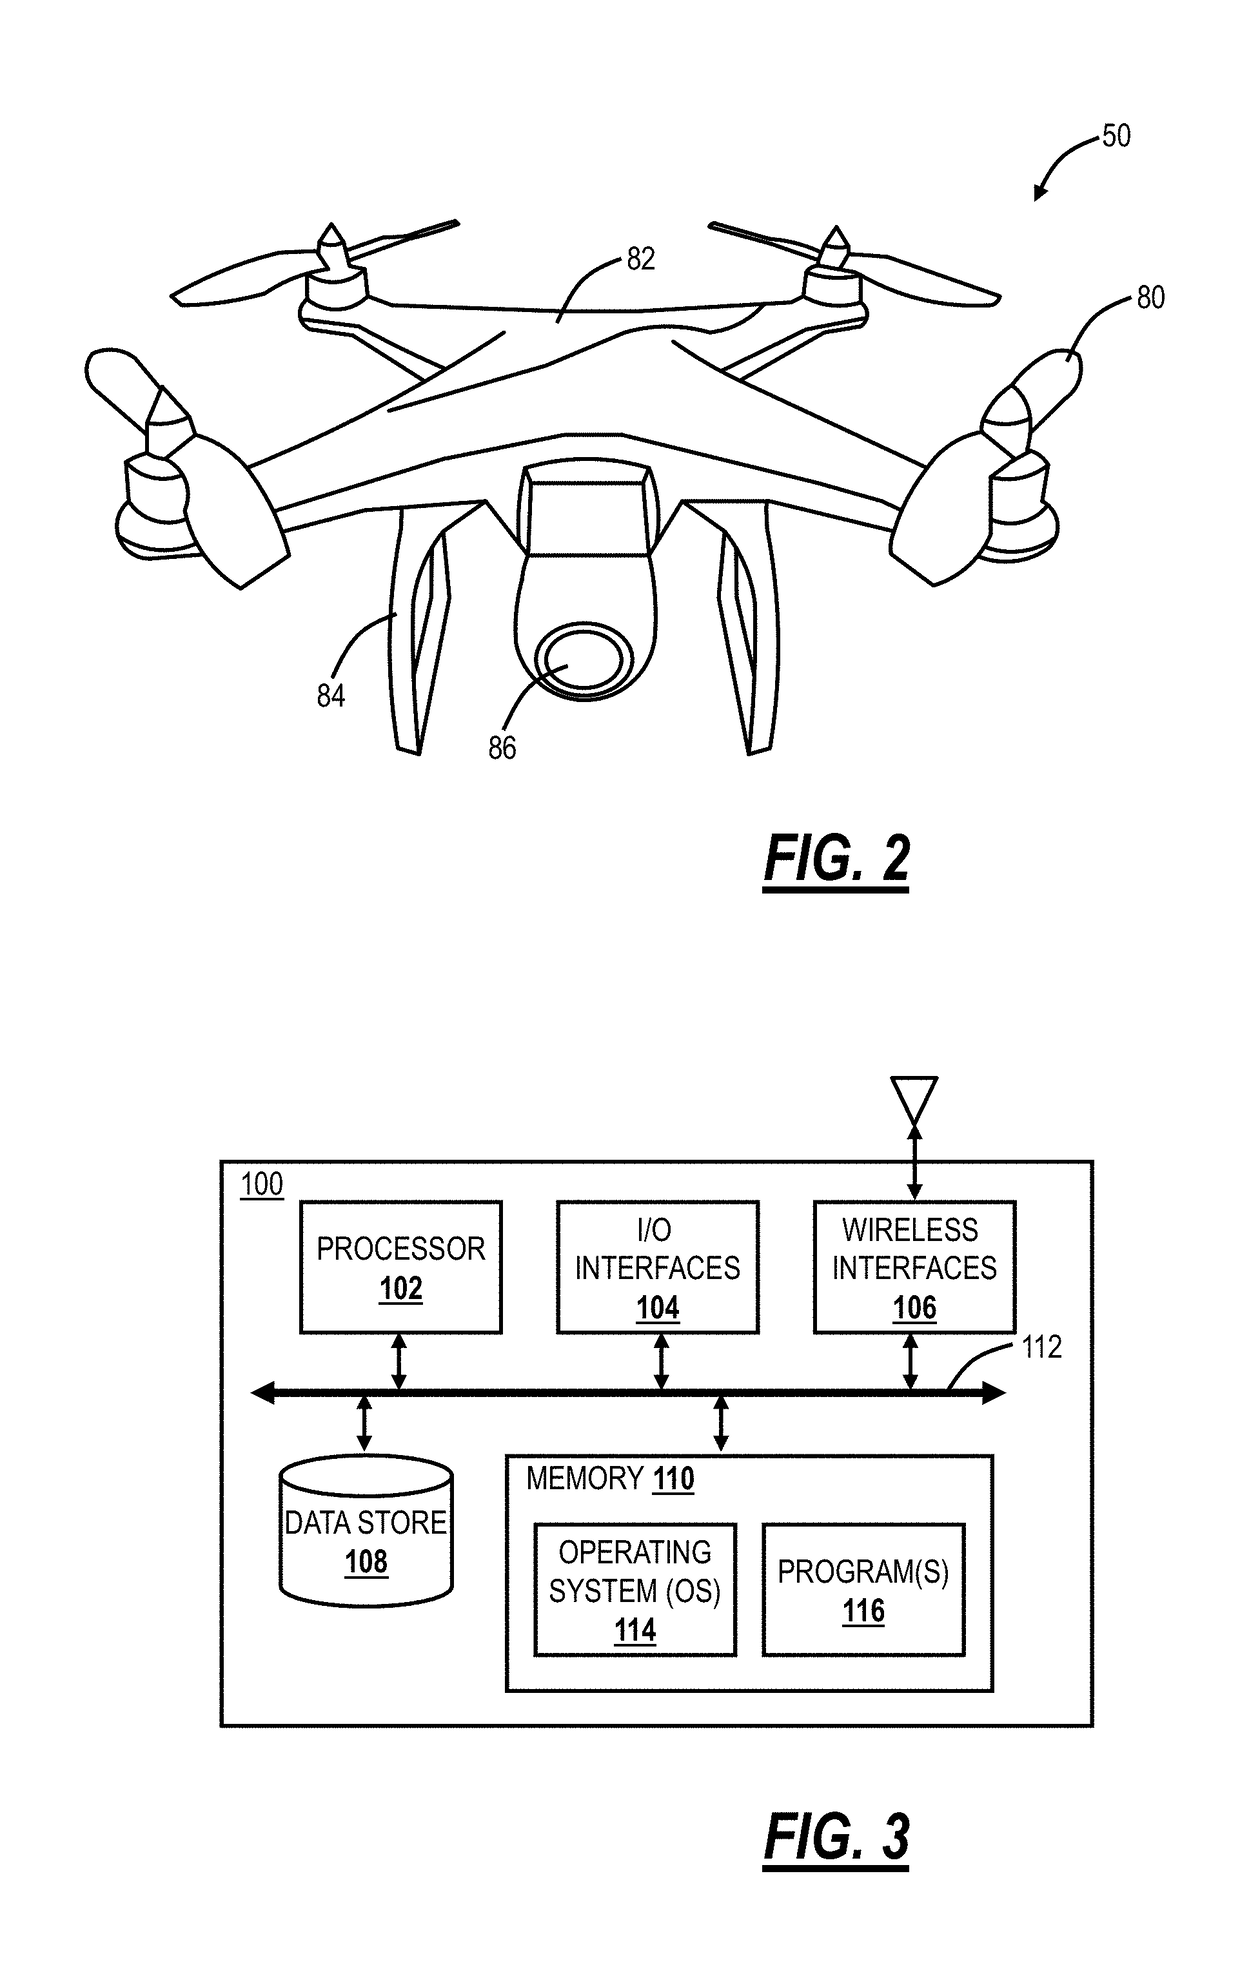 Air traffic control monitoring systems and methods for unmanned aerial vehicles